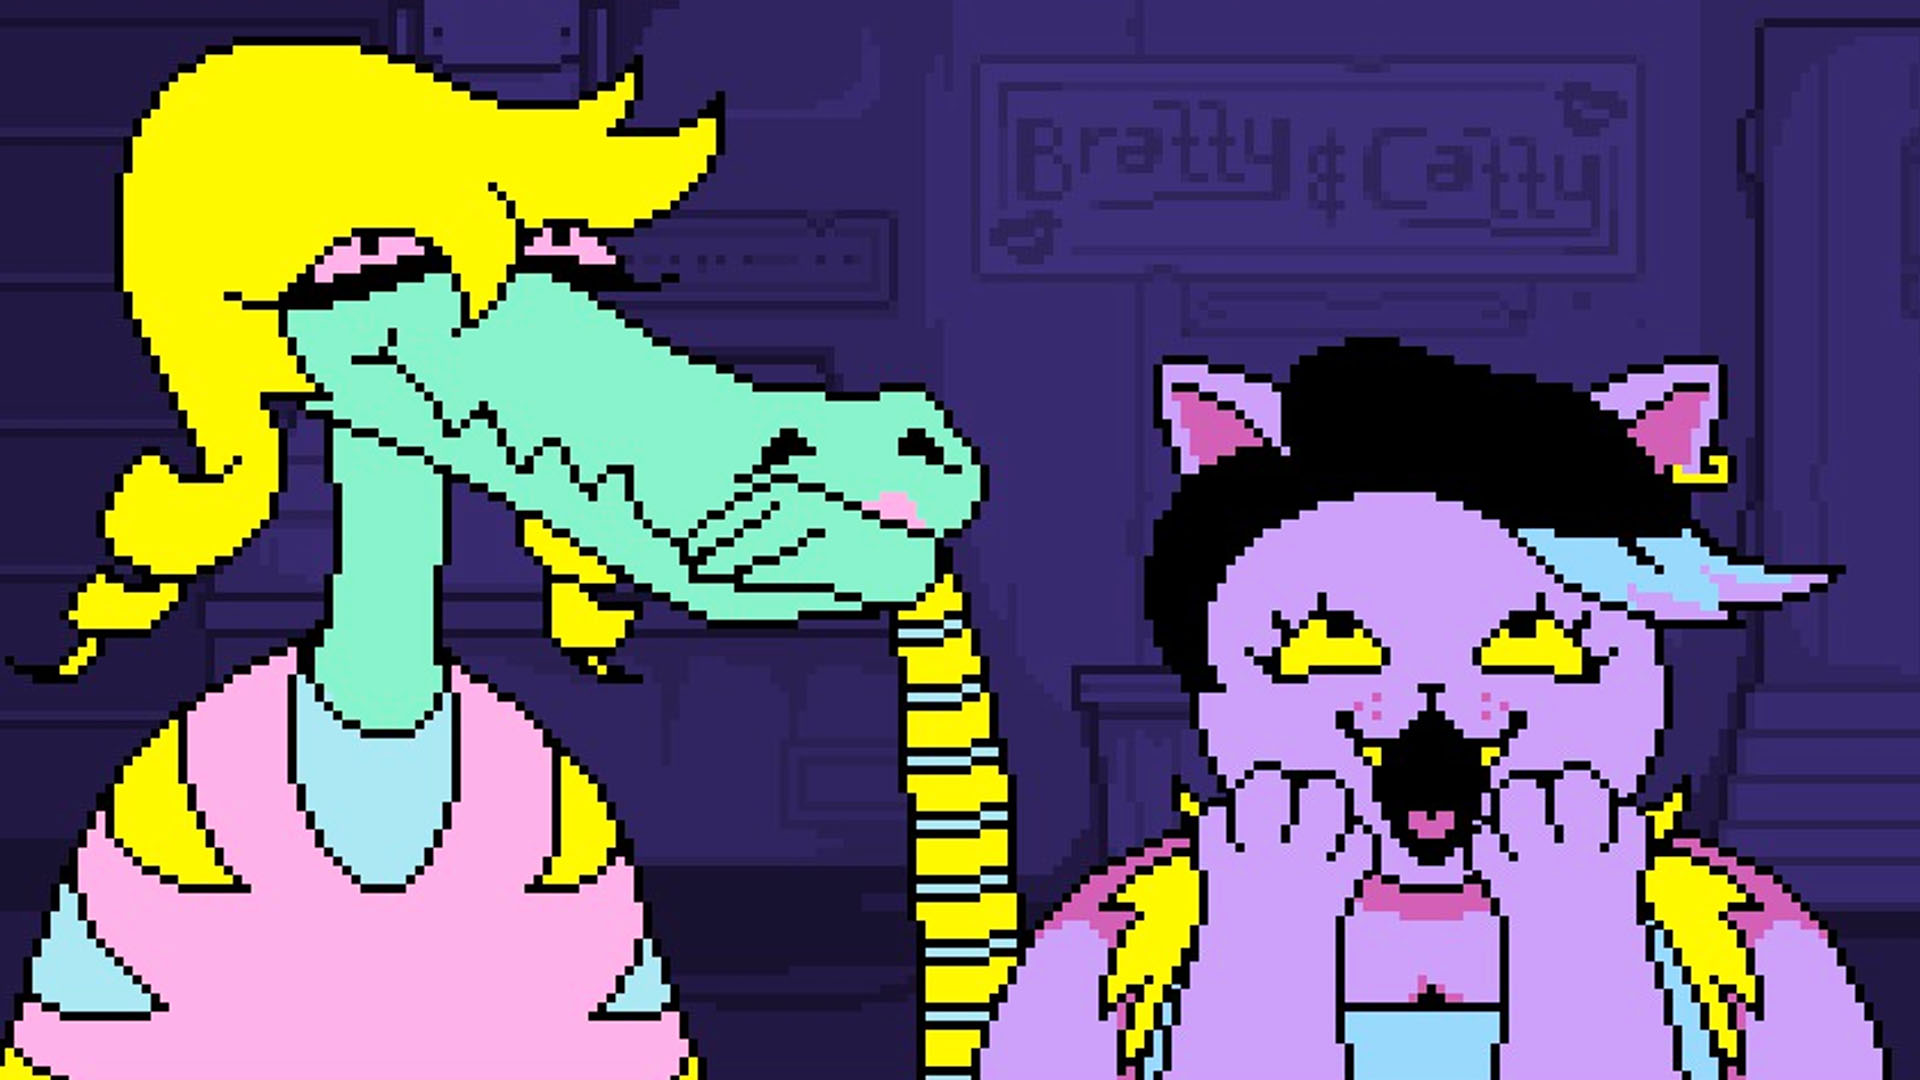 GameMaker, the engine behind Undertale and Hotline Miami, is now free